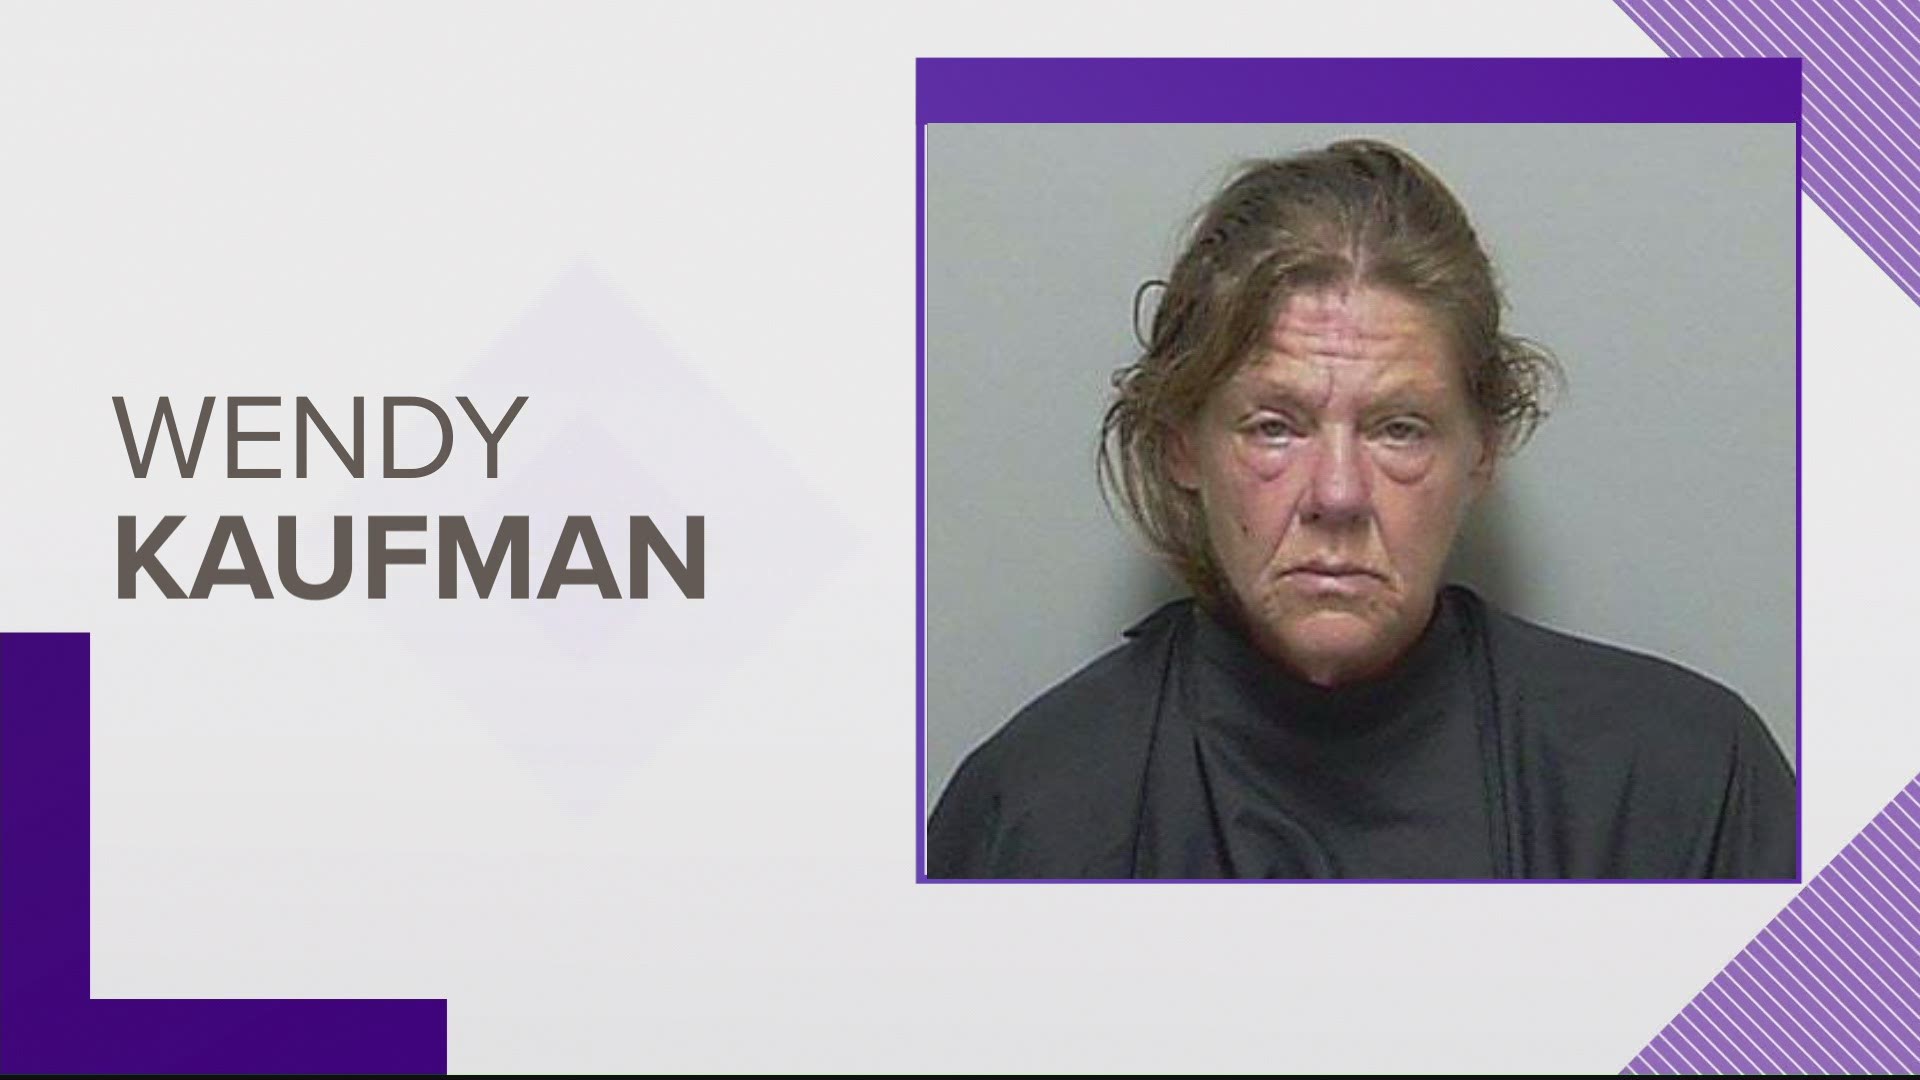 The homeowner found Wendy Kaufman inside the home "actively drinking coffee." She had also made herself eggs for breakfast, according to the sheriff's office.